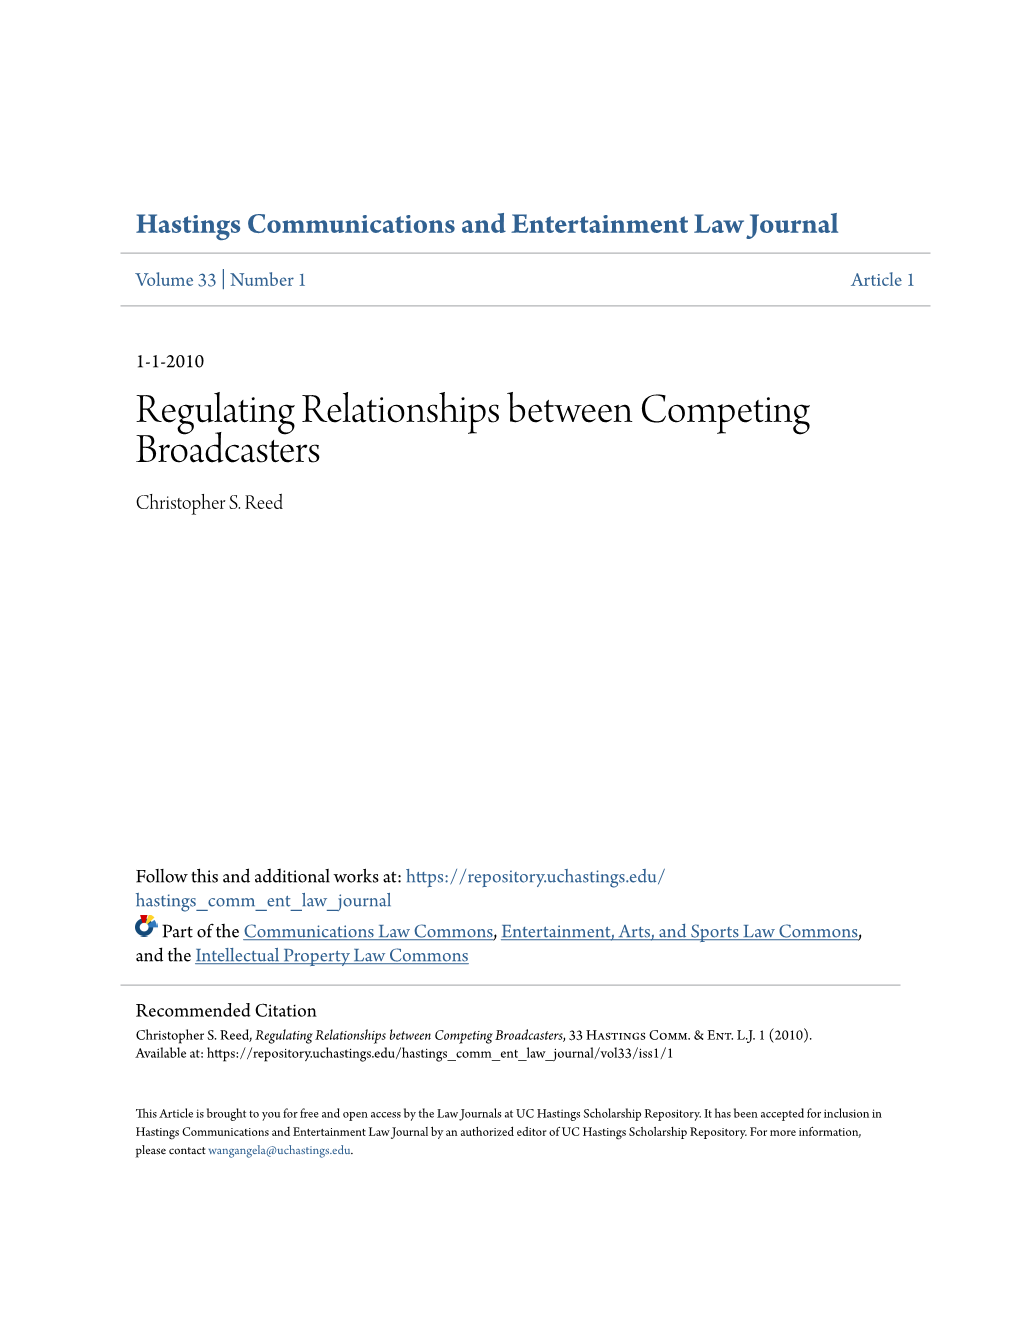 Regulating Relationships Between Competing Broadcasters Christopher S